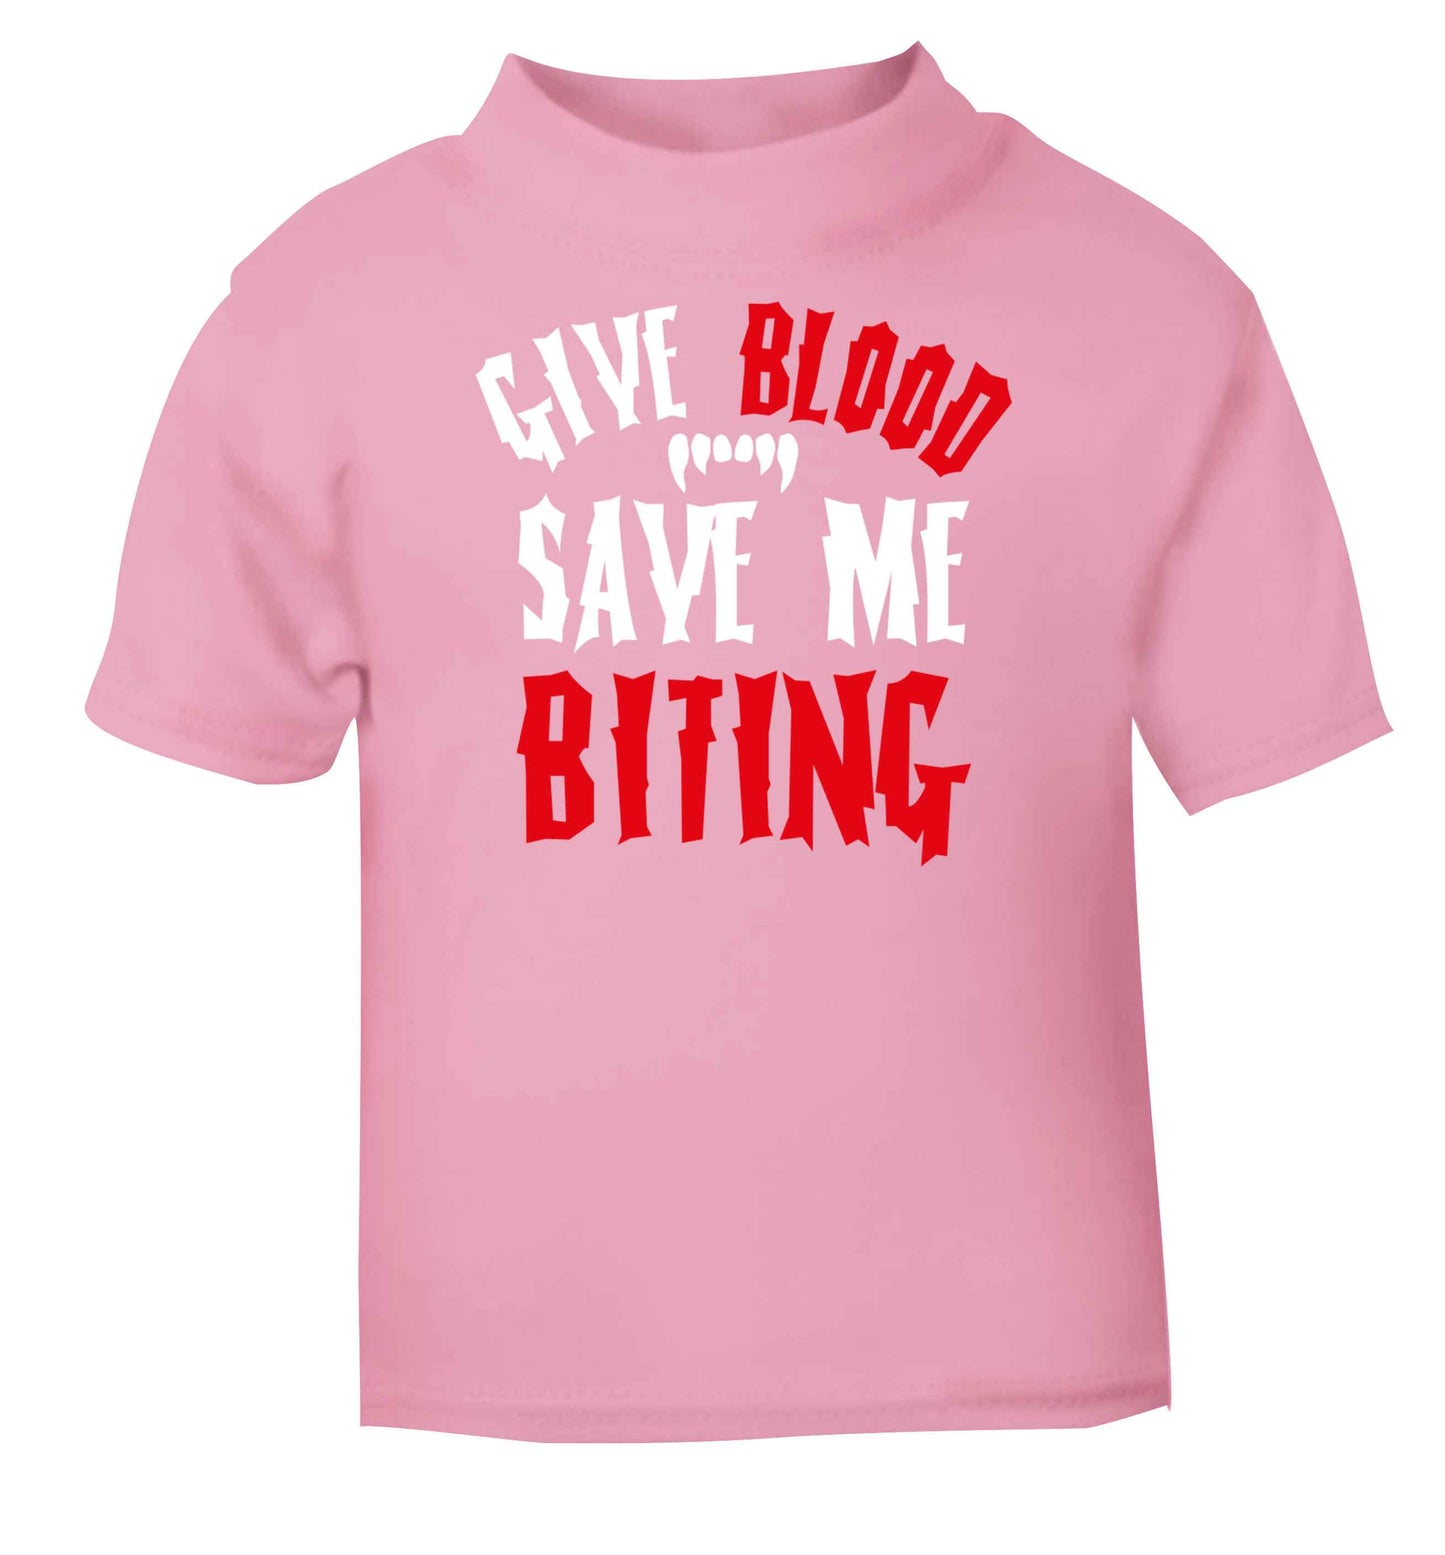 Give blood save me biting light pink baby toddler Tshirt 2 Years